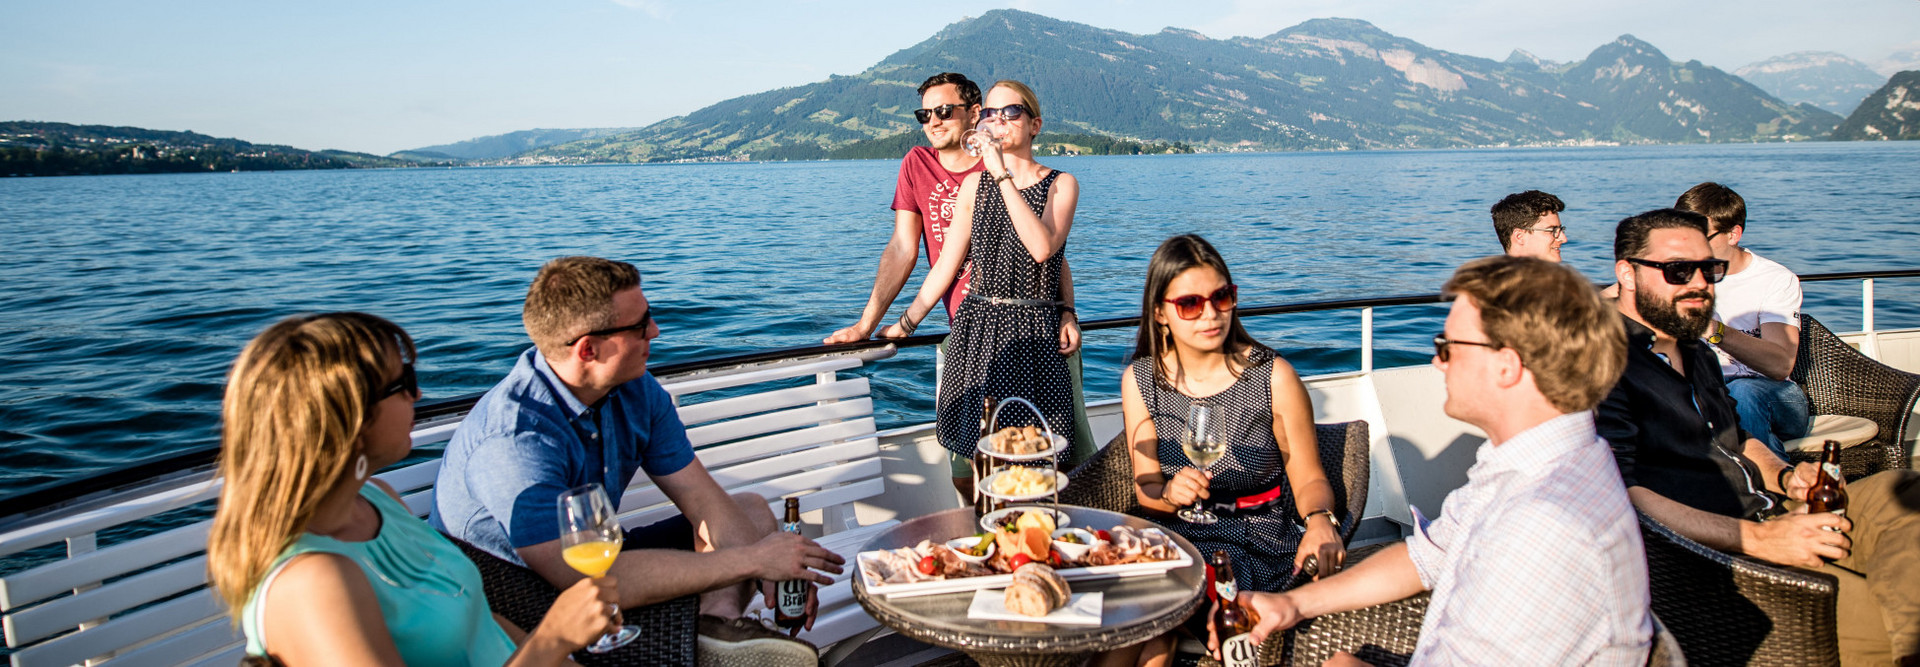 A private company celebrates on a beautiful summer day on Lake Lucerne.